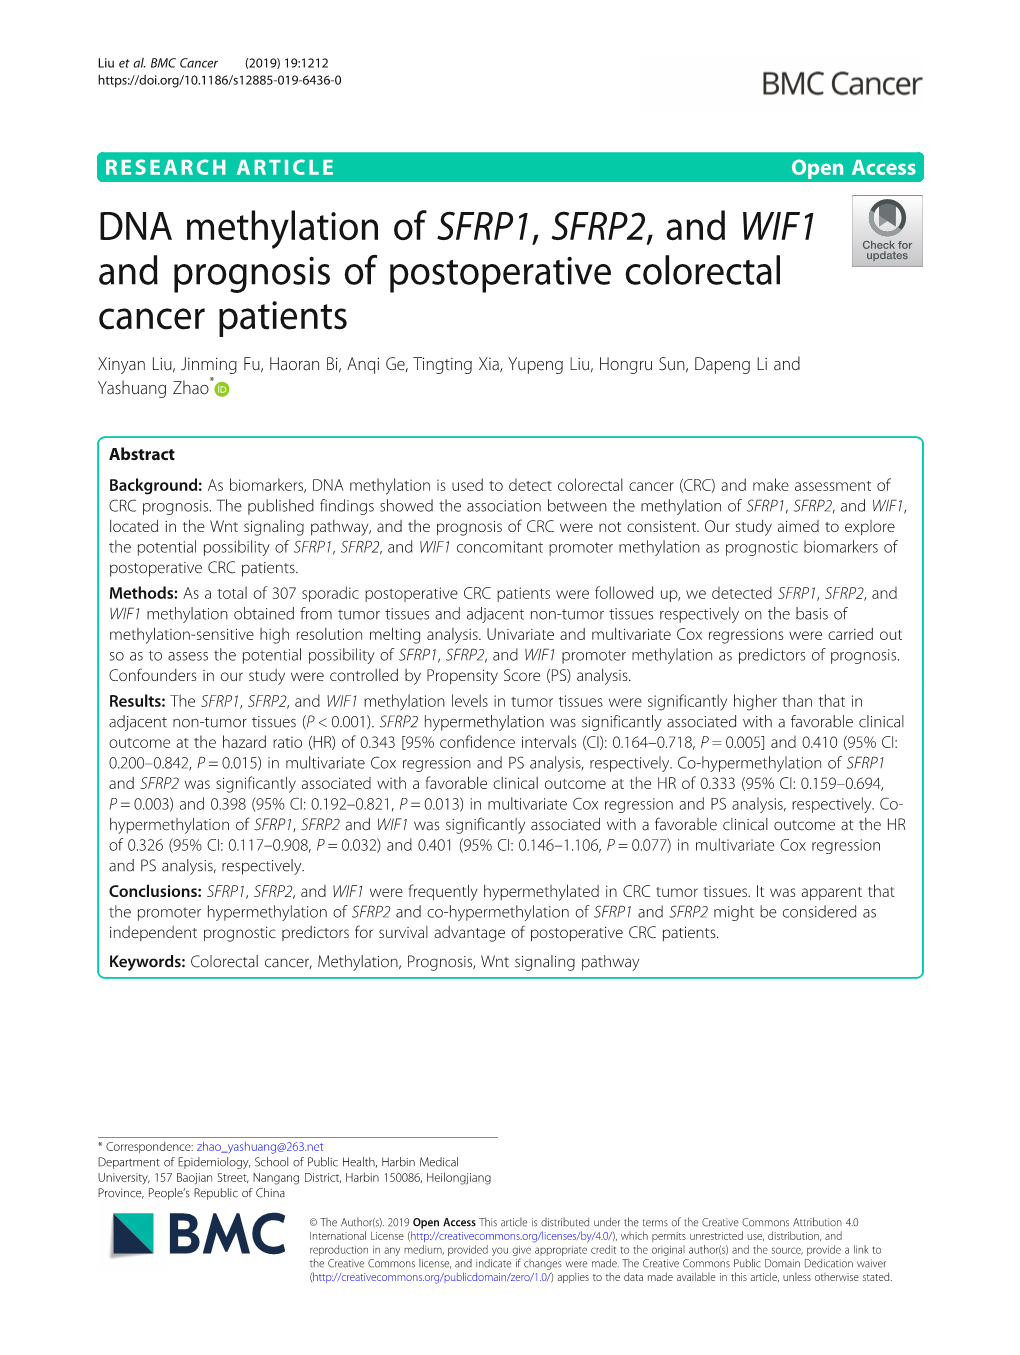 DNA Methylation of SFRP1, SFRP2, and WIF1 and Prognosis Of